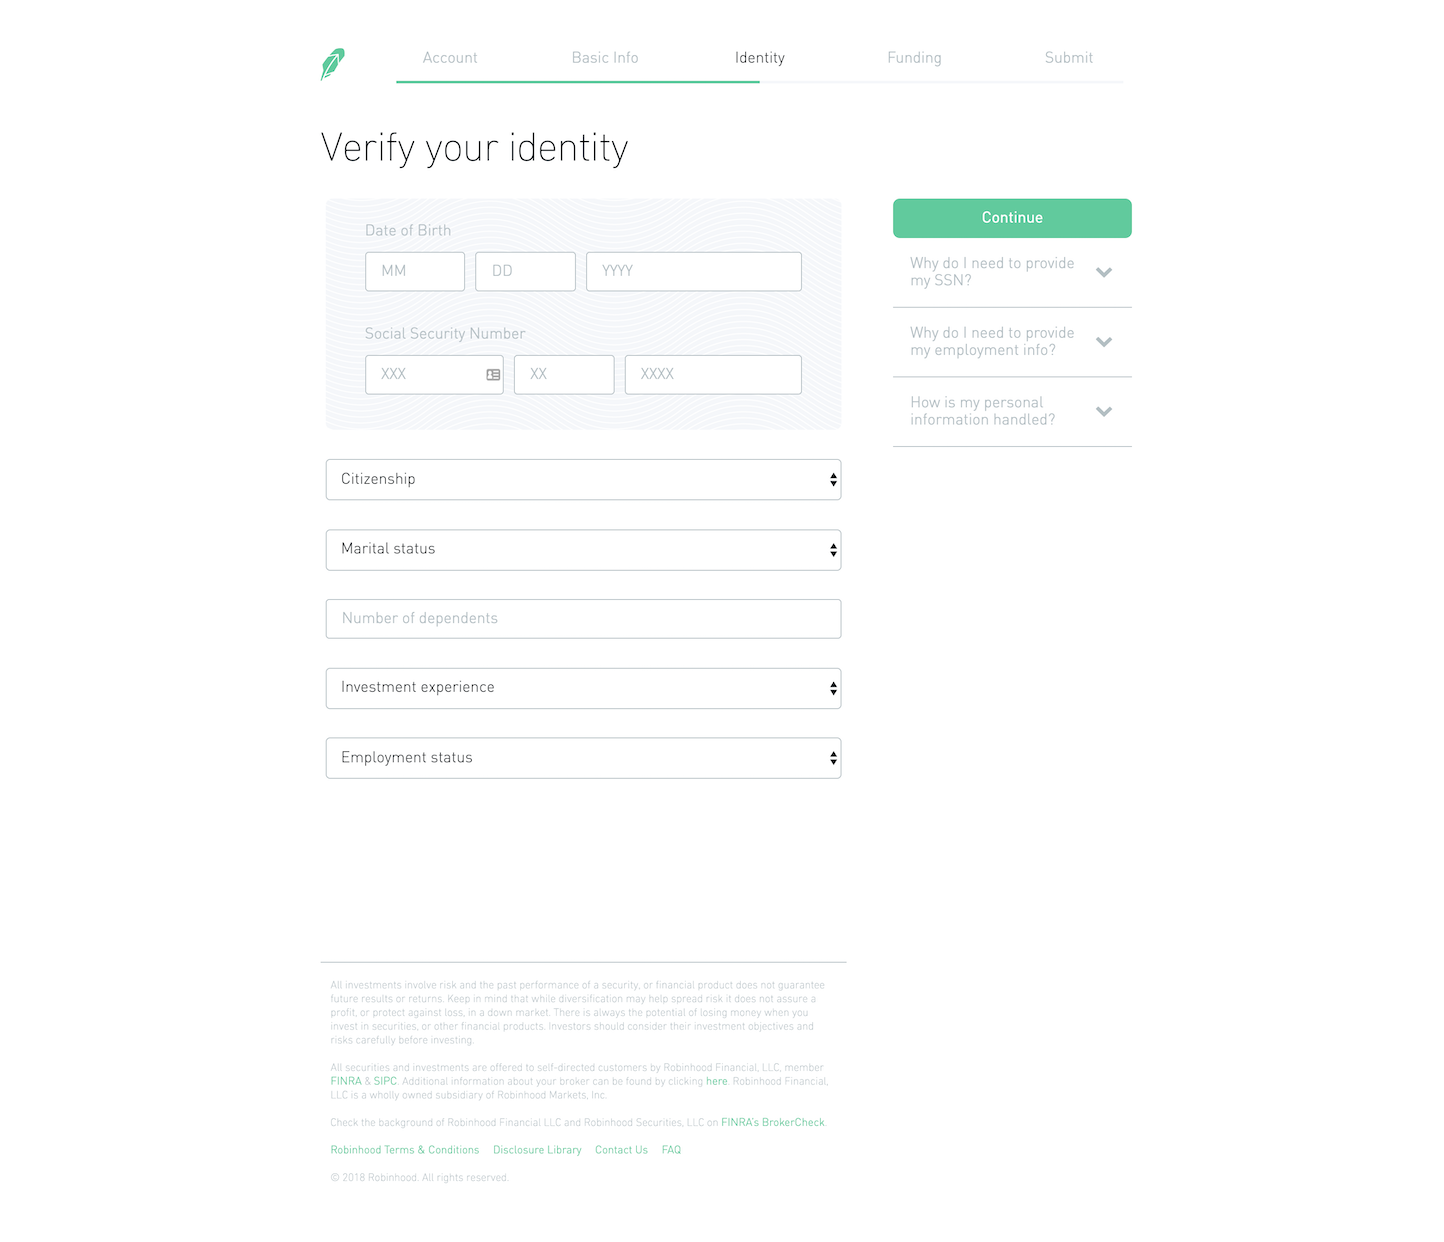 Screenshot of the Sign Up - Step 4 page from the Robinhood website.